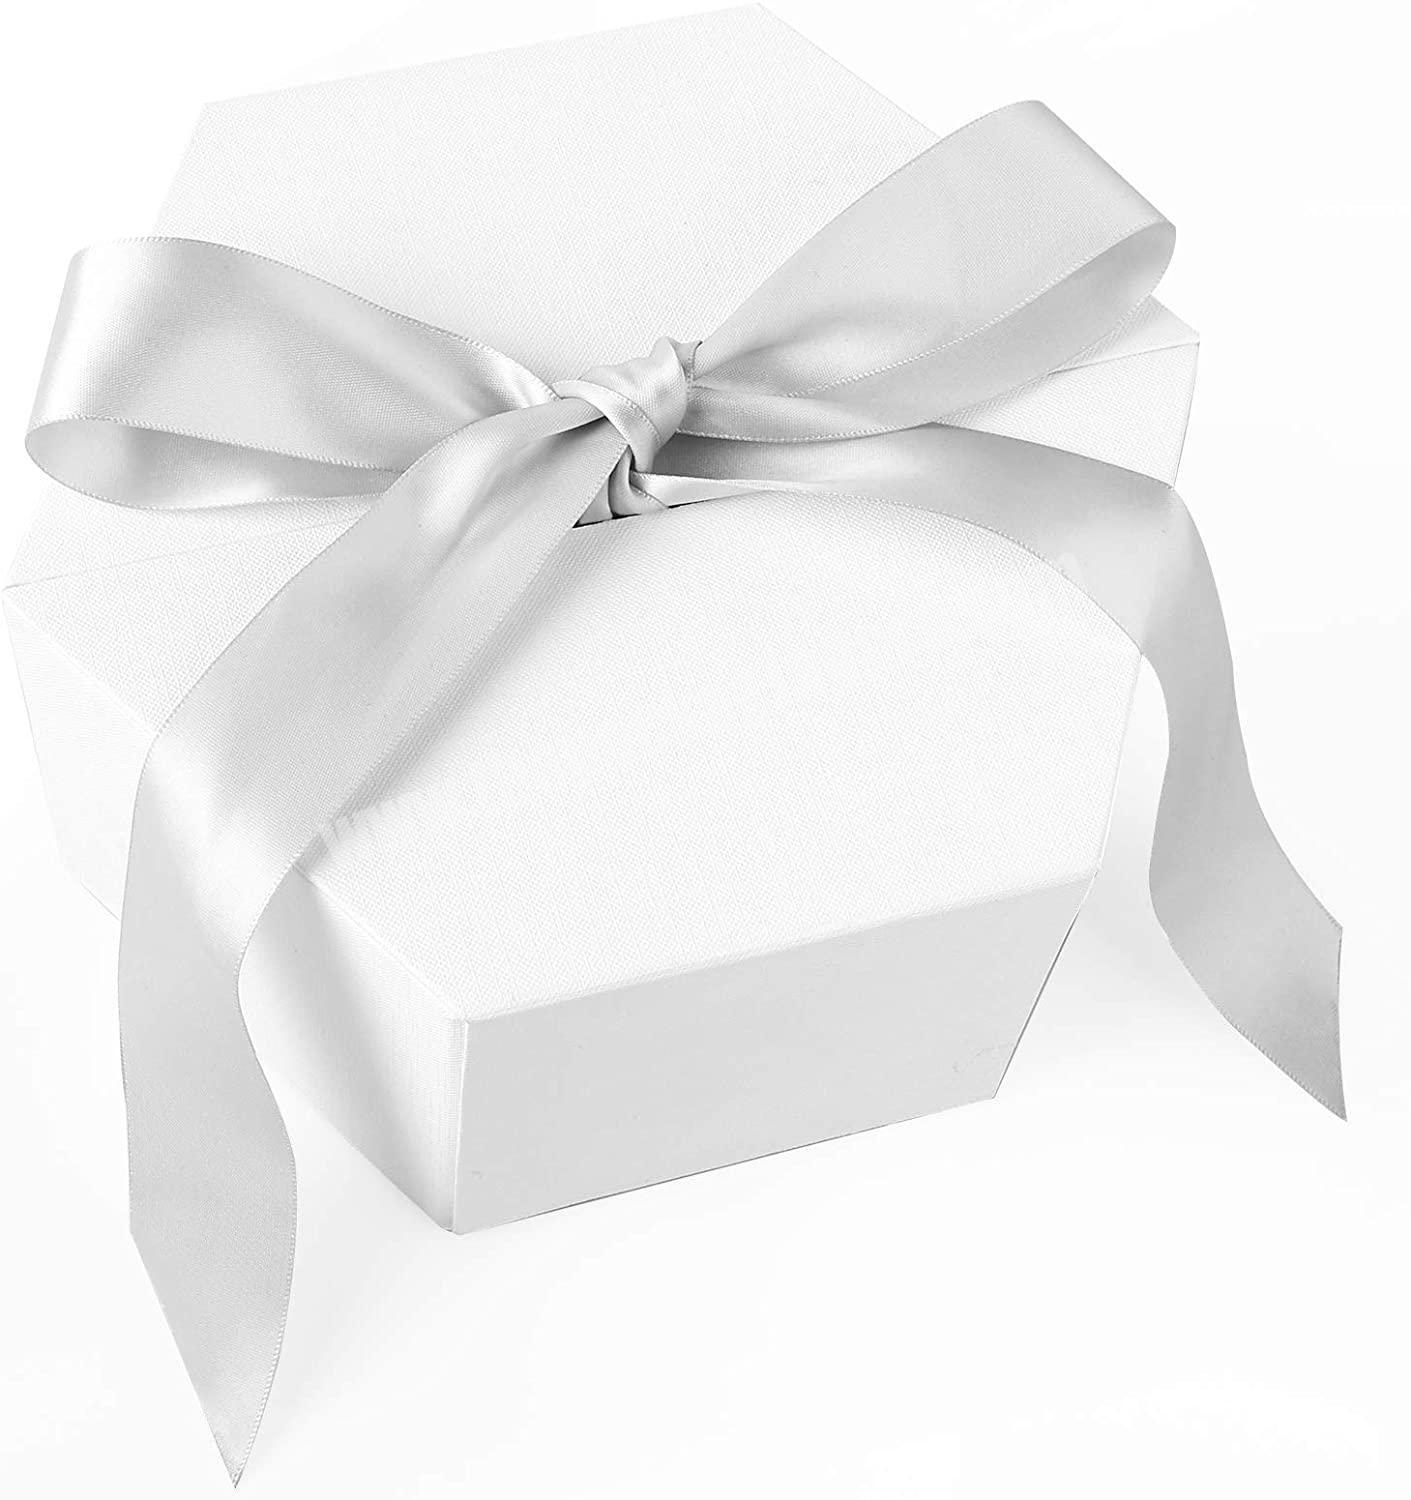 Wholesale Eco-friendly Luxury White Cardboard Birthday Wedding Gifts Box With Magnet